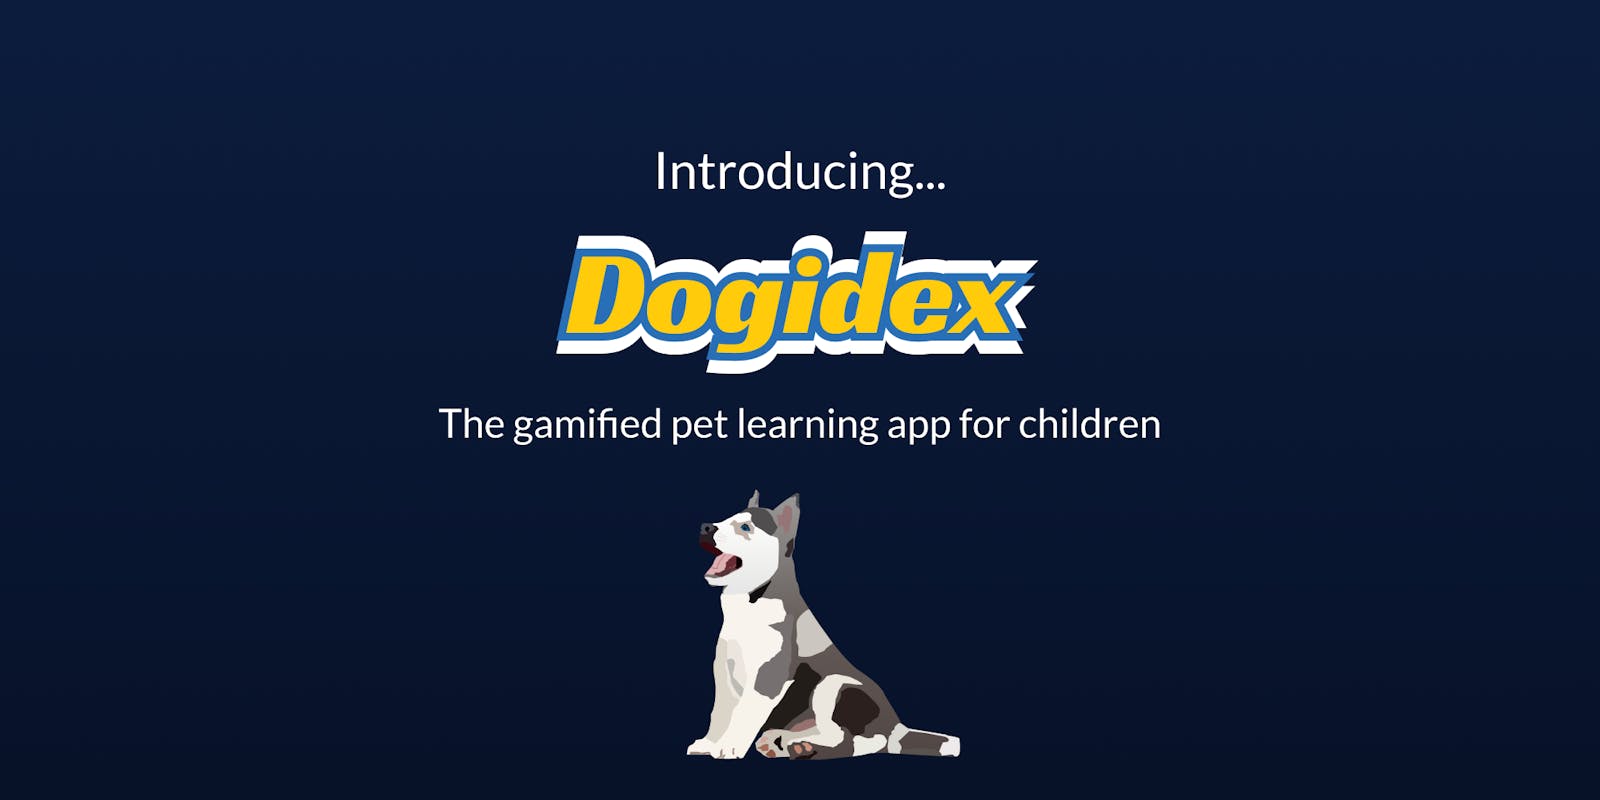 Introducing Dogidex the gamified pet learning app for children